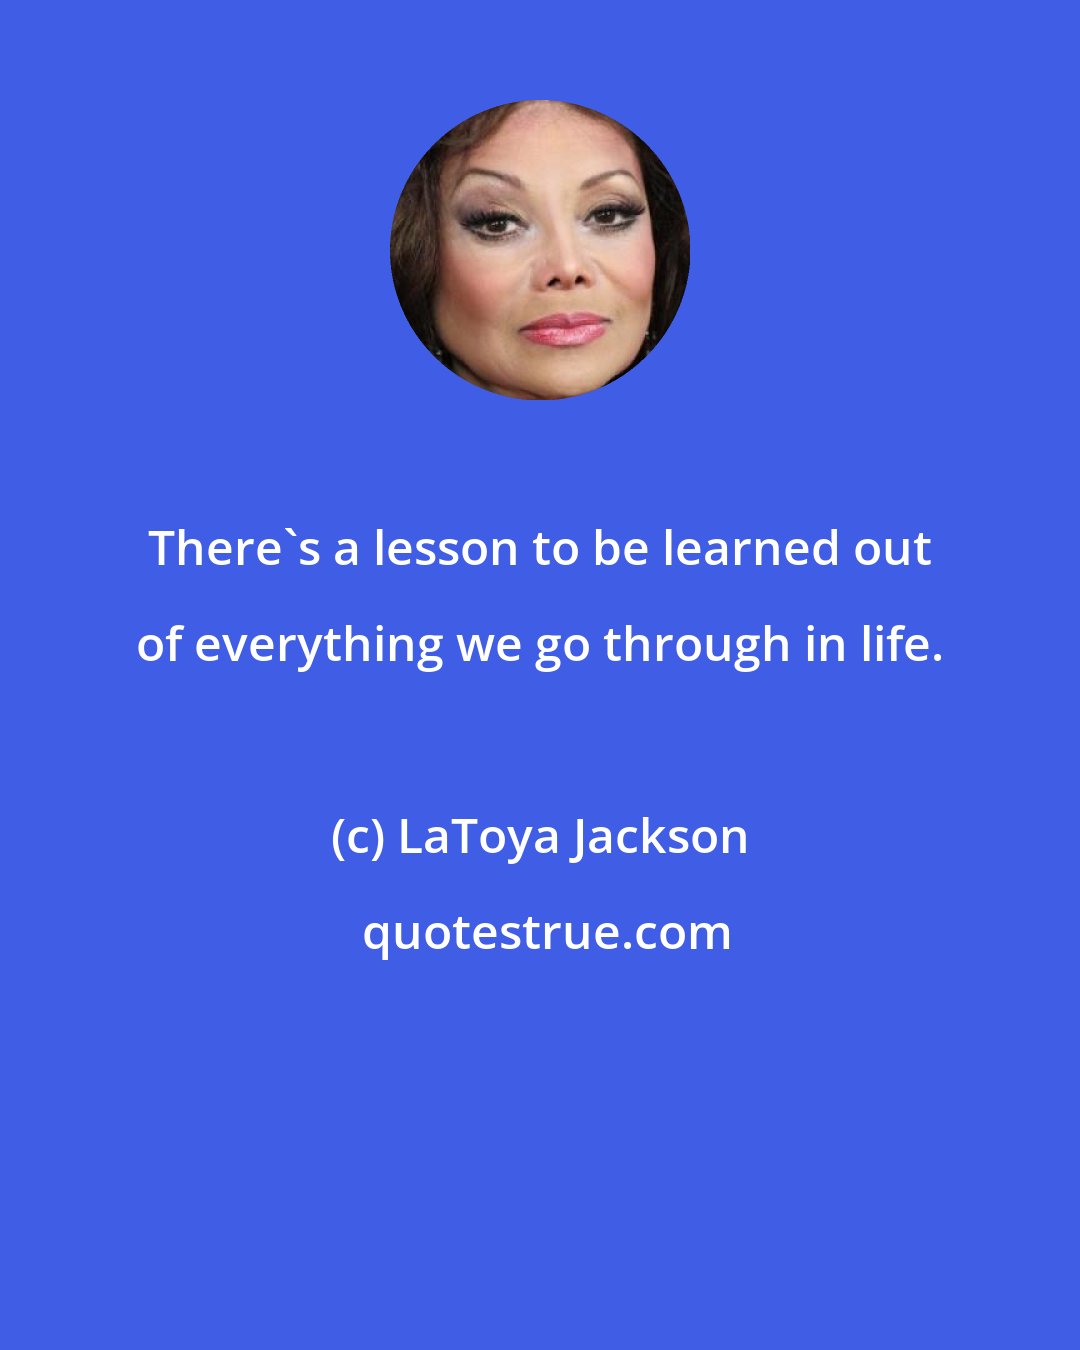 LaToya Jackson: There's a lesson to be learned out of everything we go through in life.